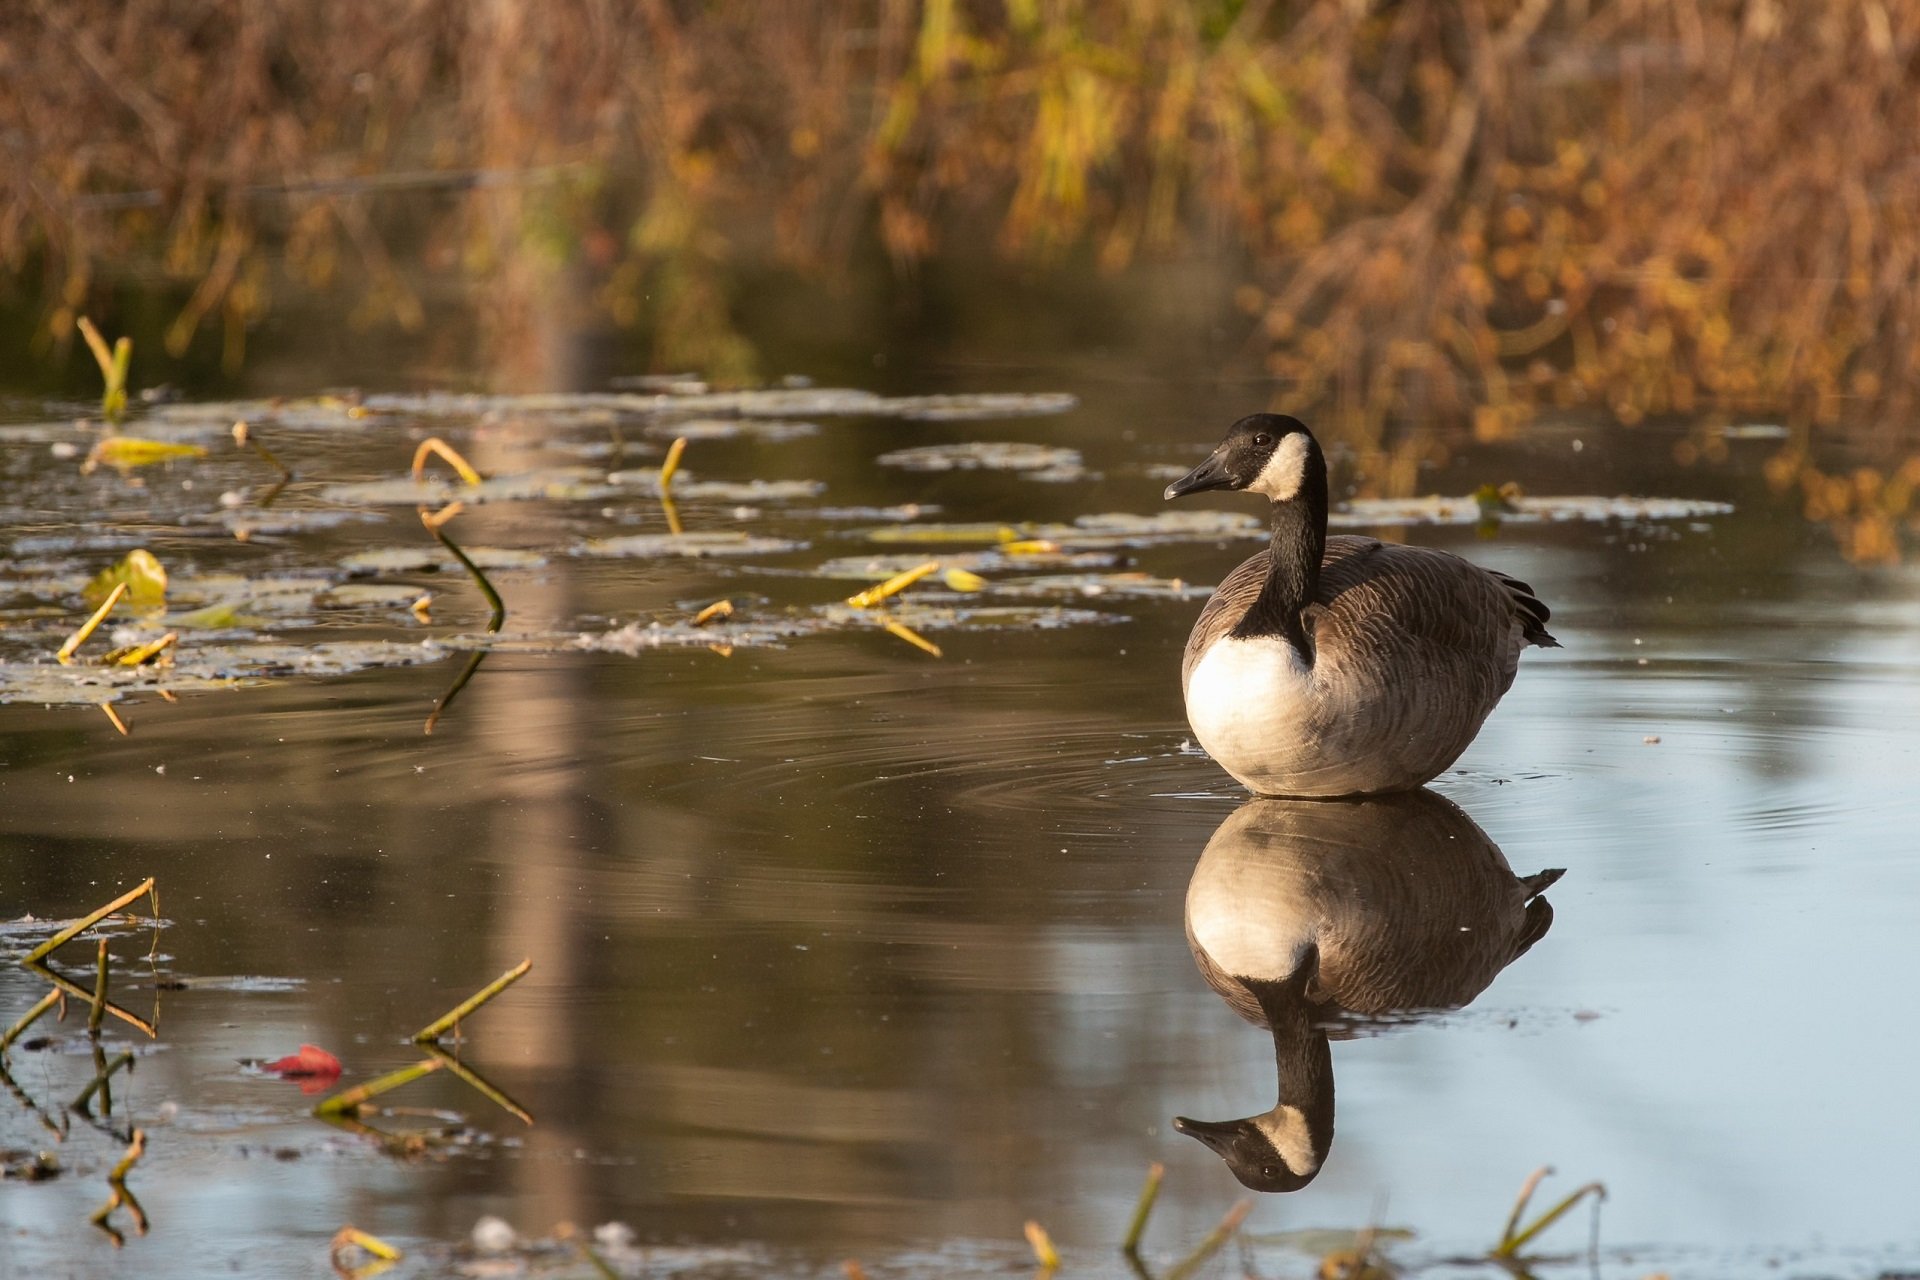 A Canada Goose glides through the water.